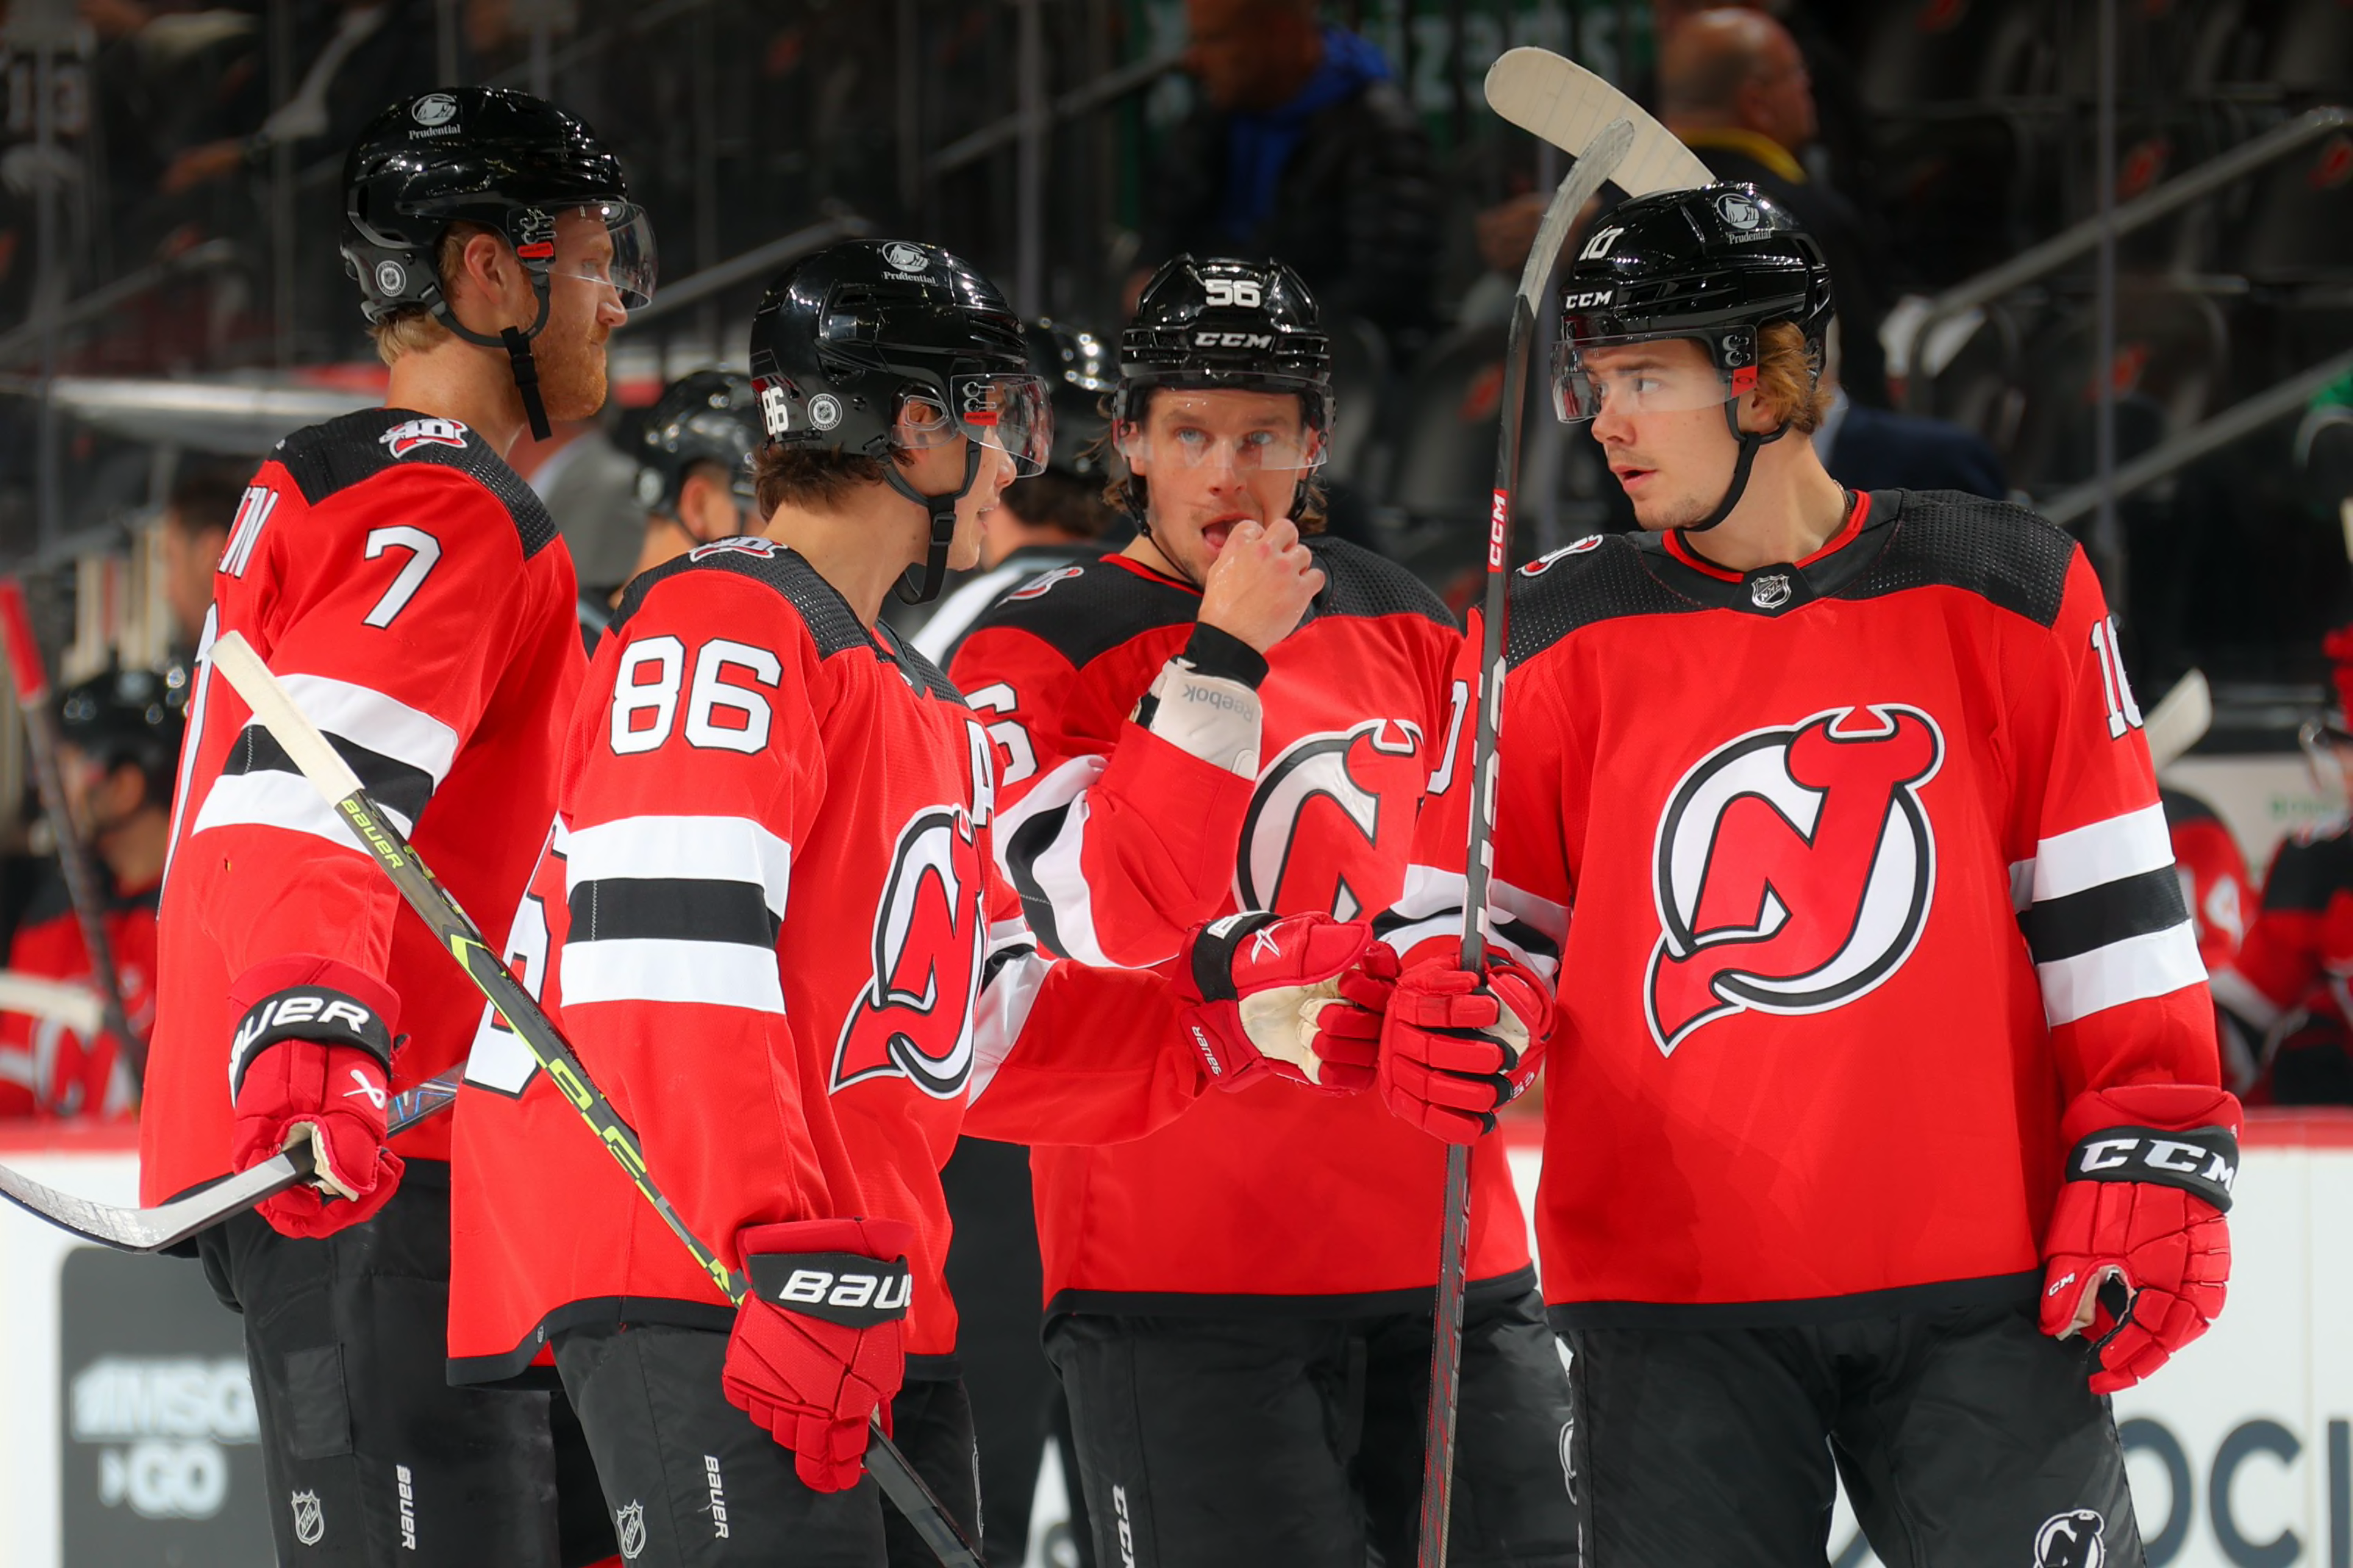 The New Jersey Devils Need to End the 'Hughes as a Winger